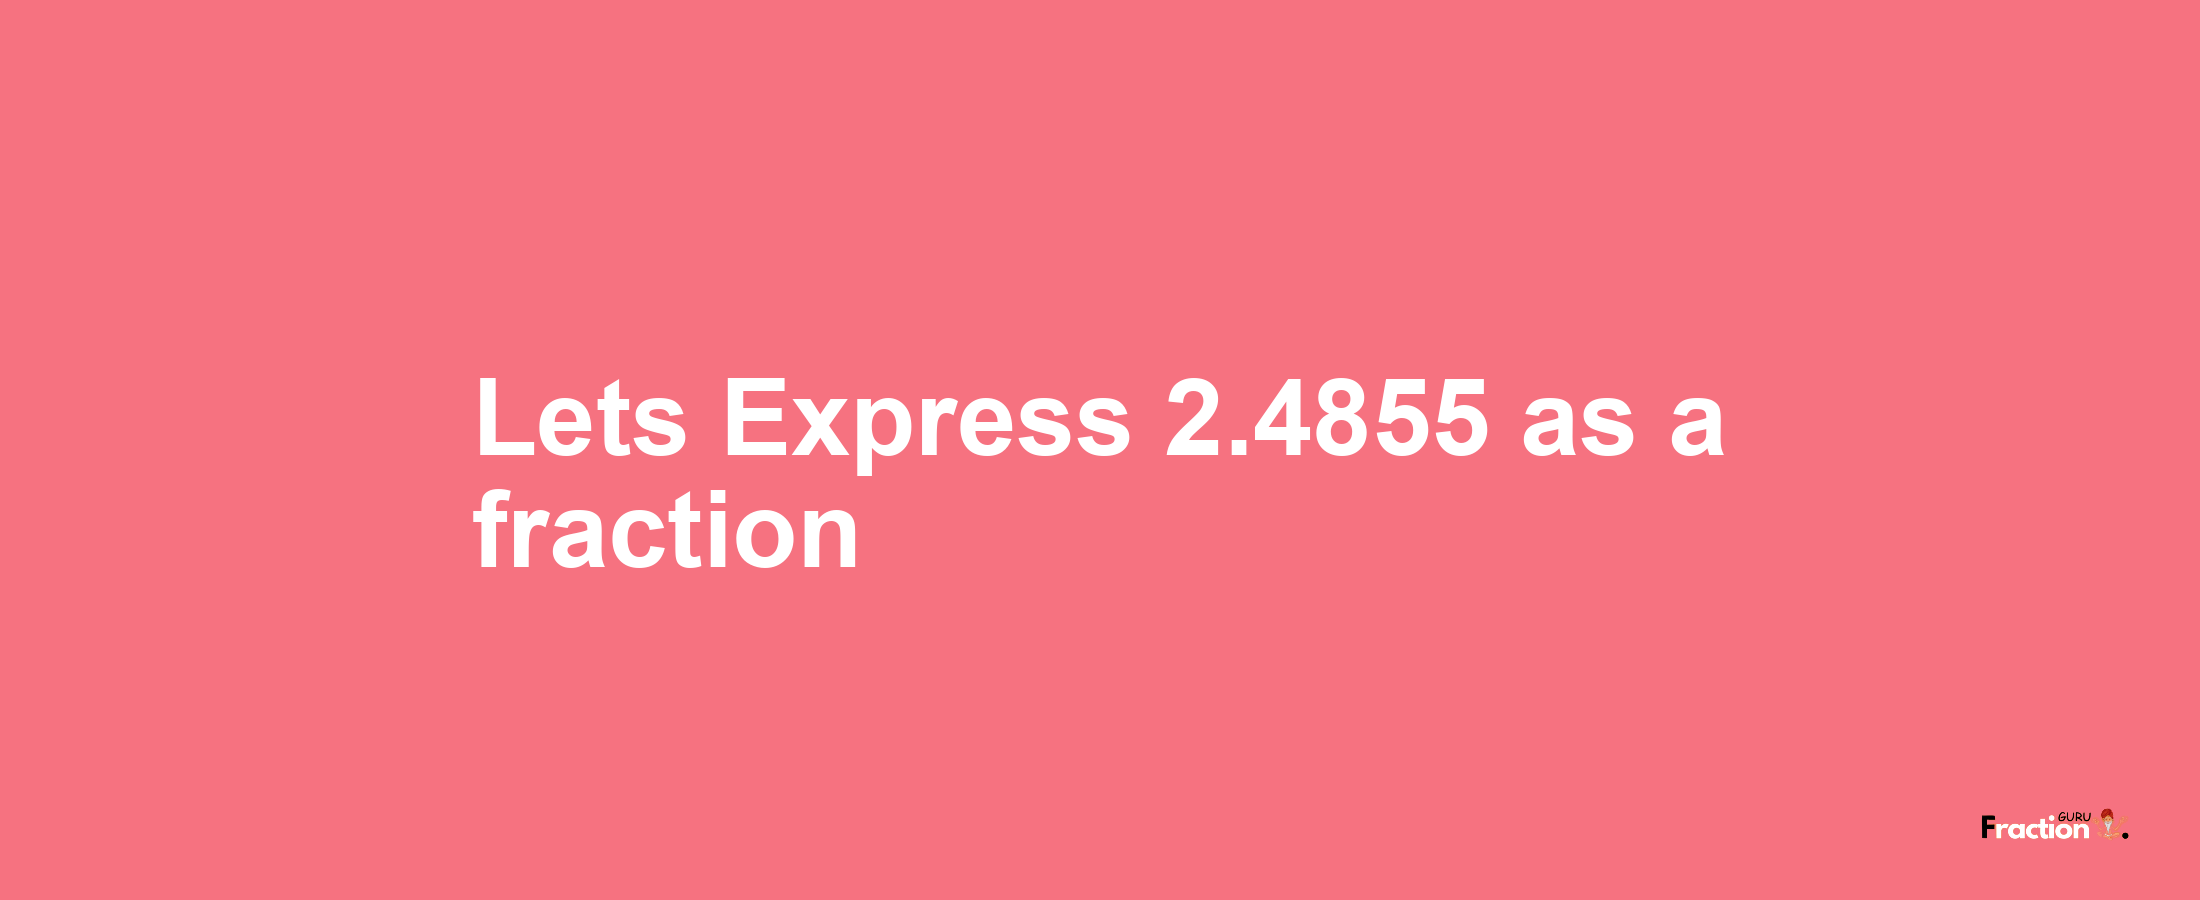 Lets Express 2.4855 as afraction